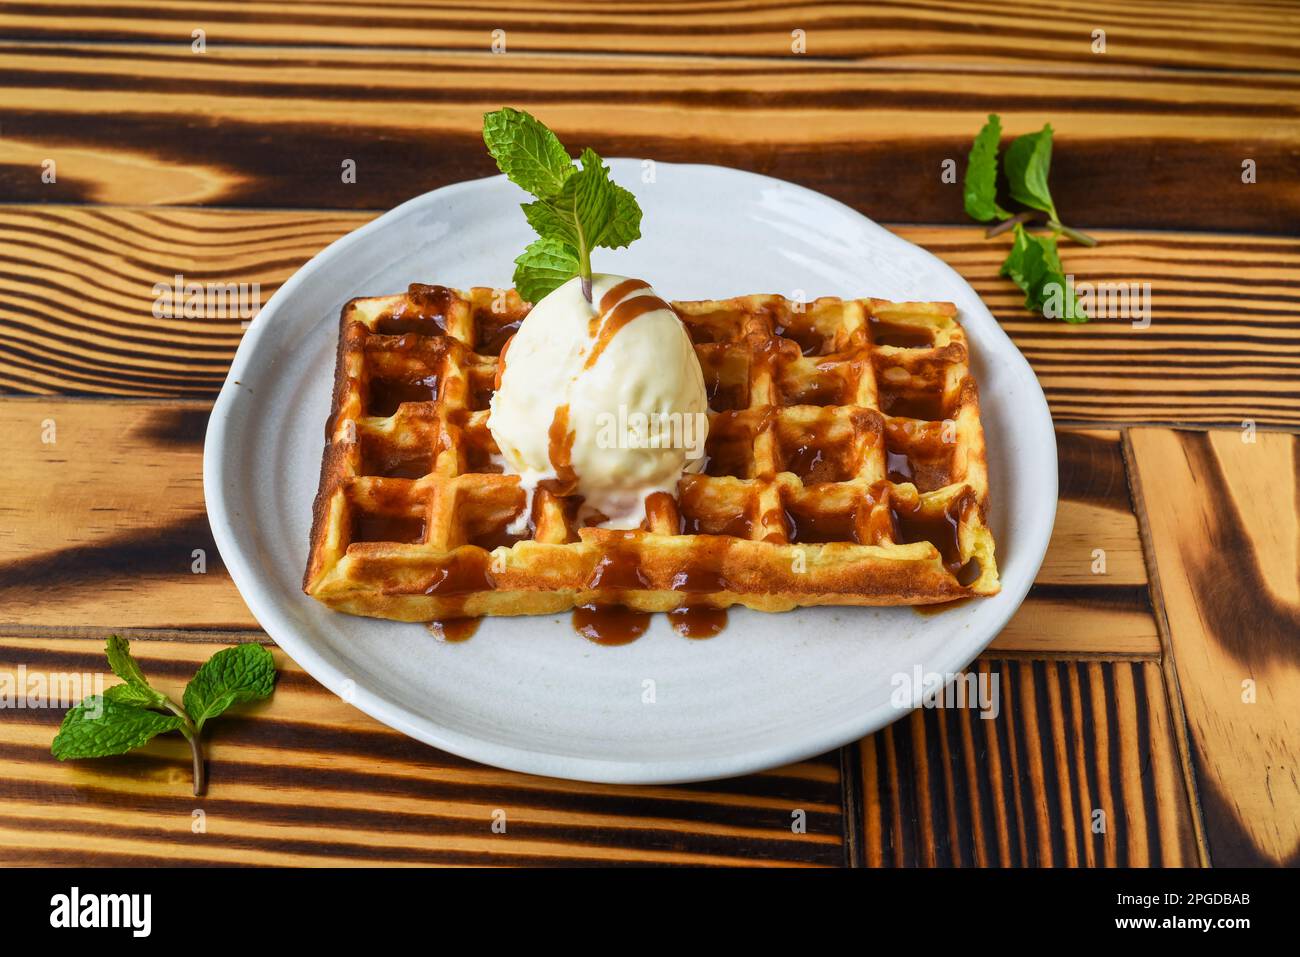 https://c8.alamy.com/comp/2PGDBAB/waffle-with-ice-cream-salted-caramel-on-white-plate-close-up-2PGDBAB.jpg